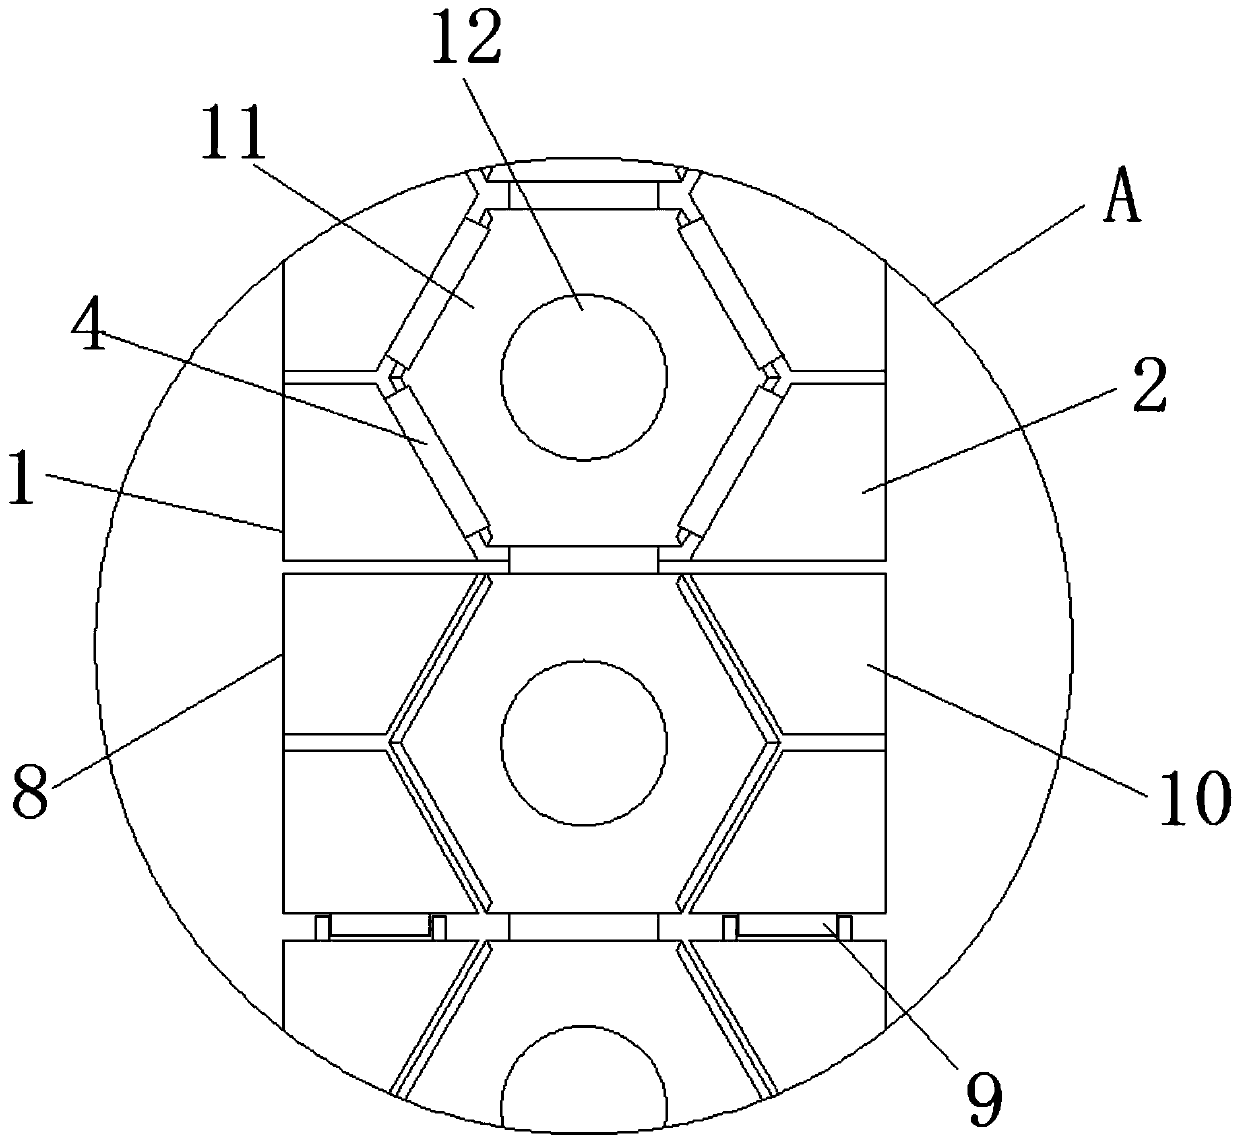 Connecting structure for electronic wristband based on inlaying limiting